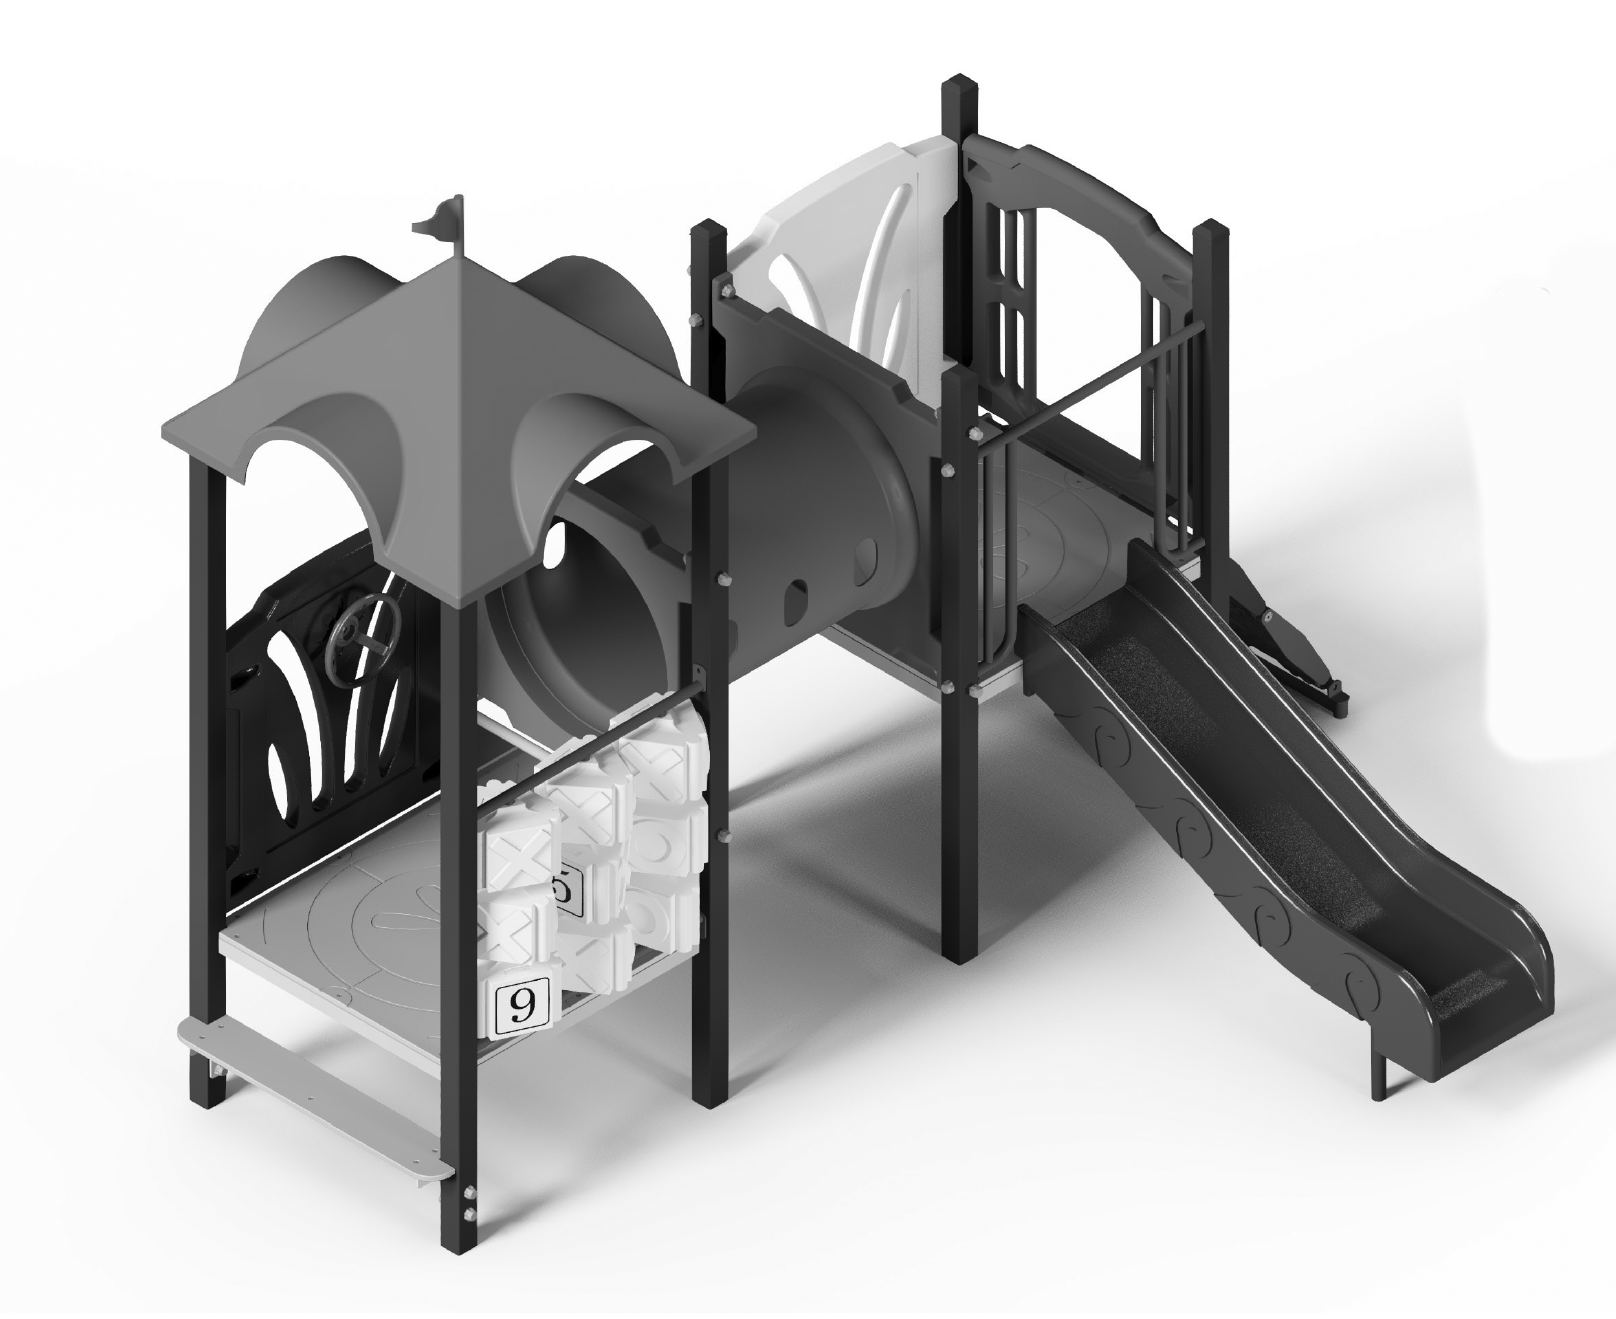 The replacement play module with slide, tunnel and number spinners. 